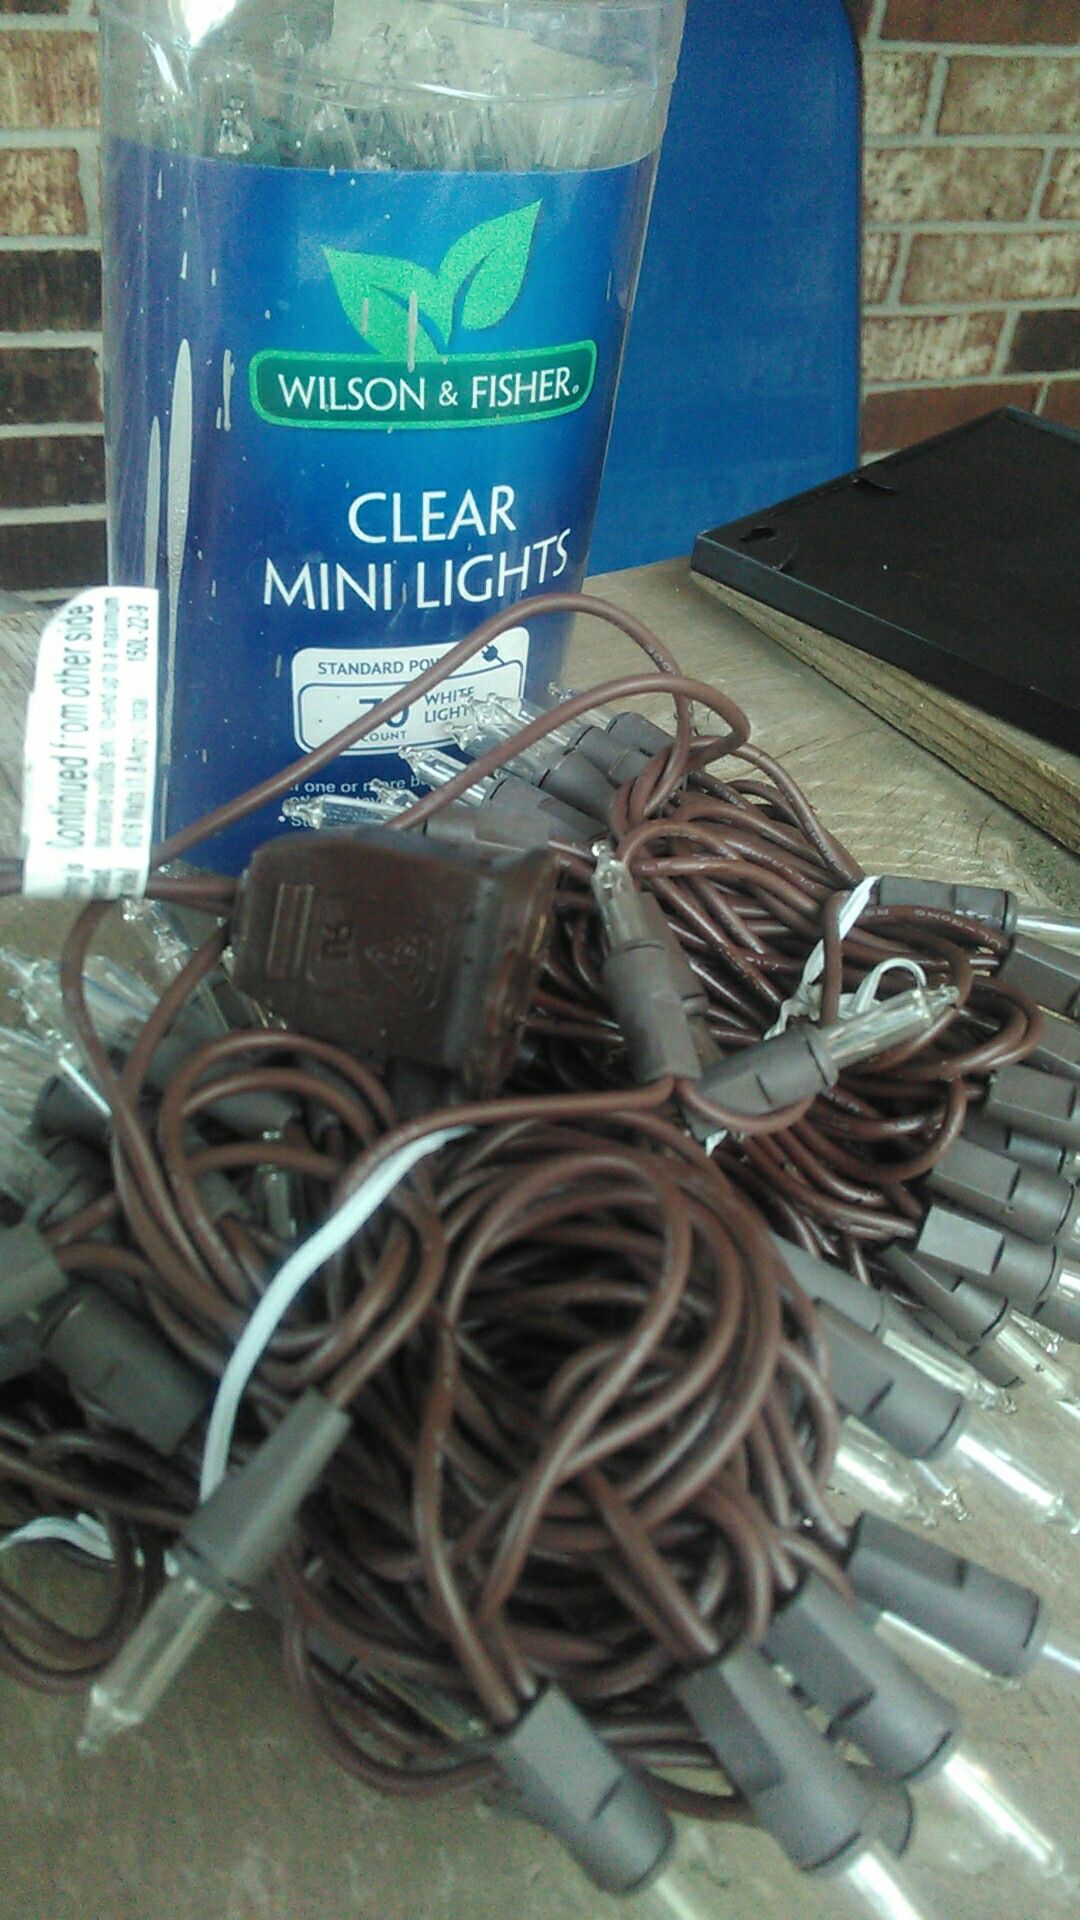 Clear string lights and mini lights never used